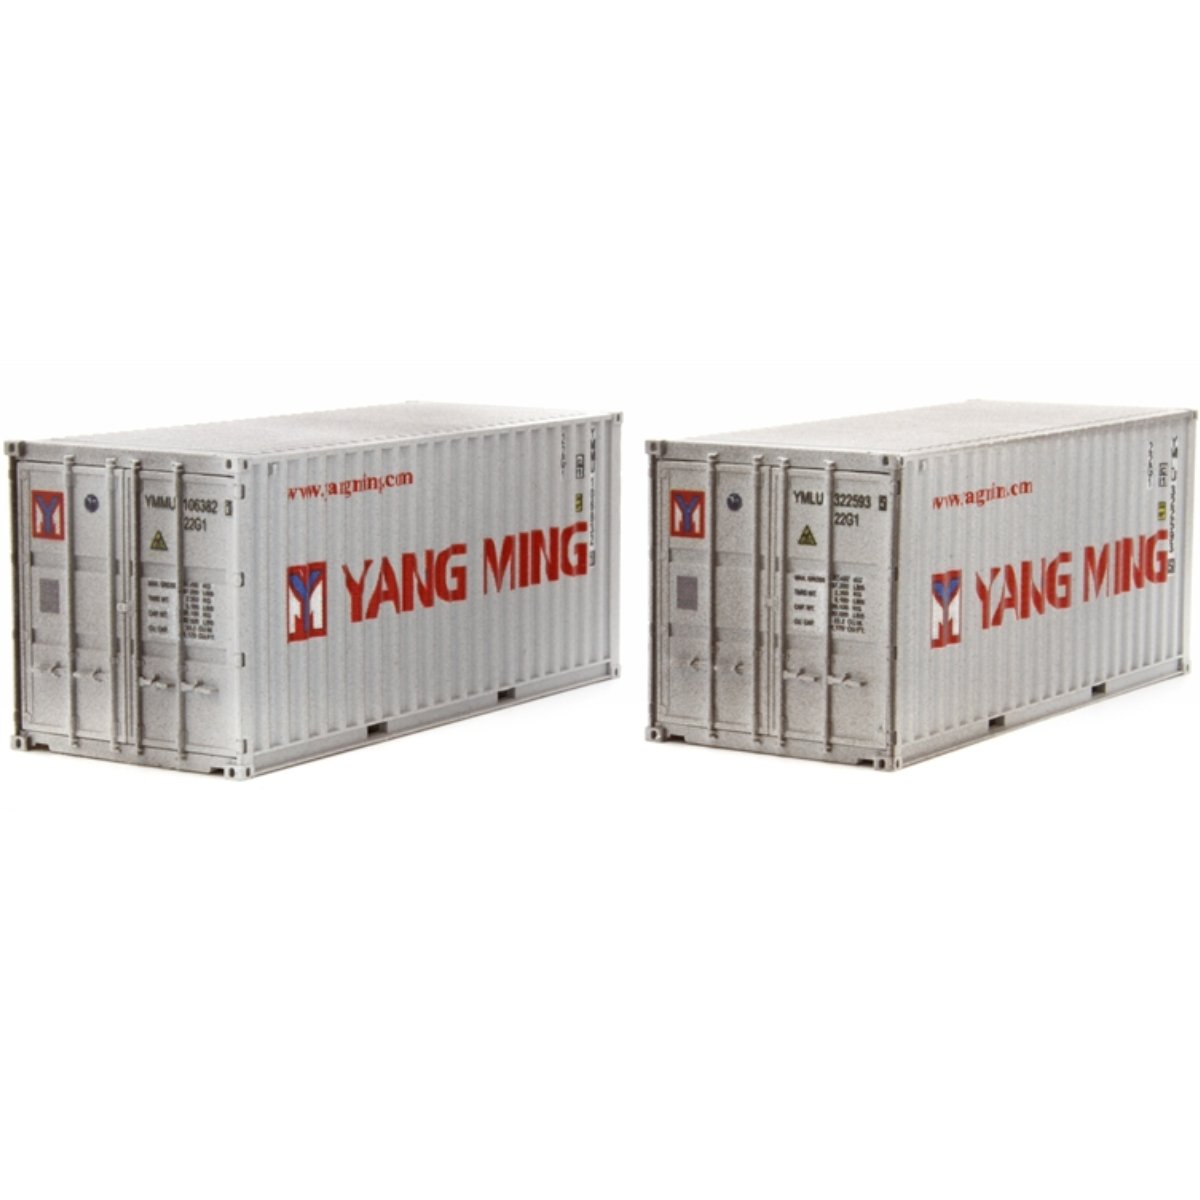 Dapol 4F - 028 - 060 20ft Containers Yang Ming 322593 5 & 106832 1 Weathered - OO Gauge - Phillips Hobbies